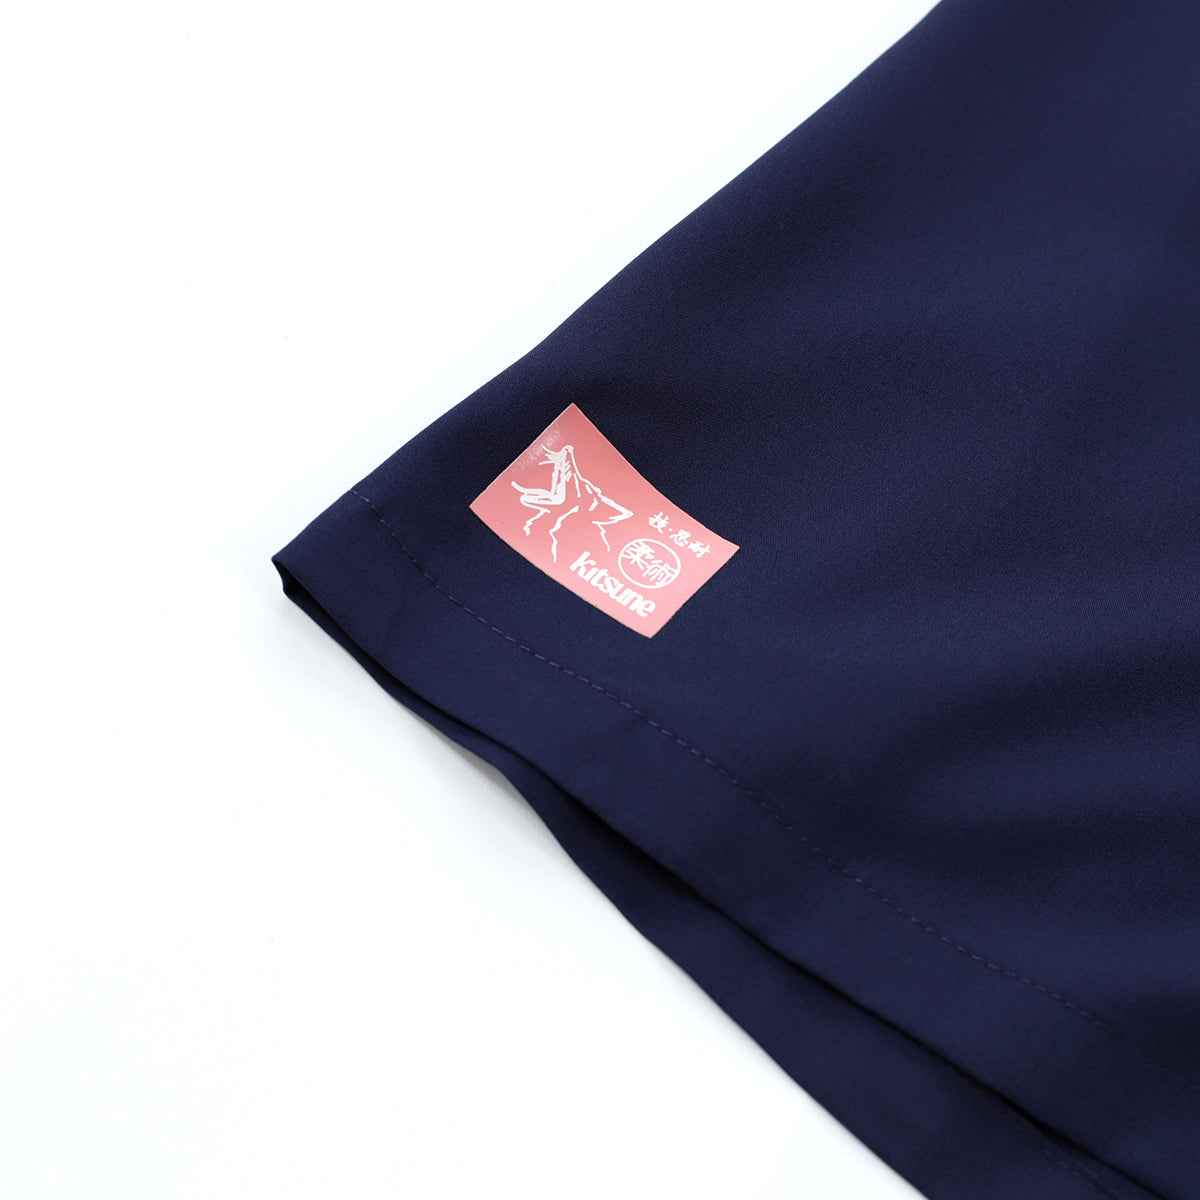 "Bloom" Compression-Lined Shorts - Navy